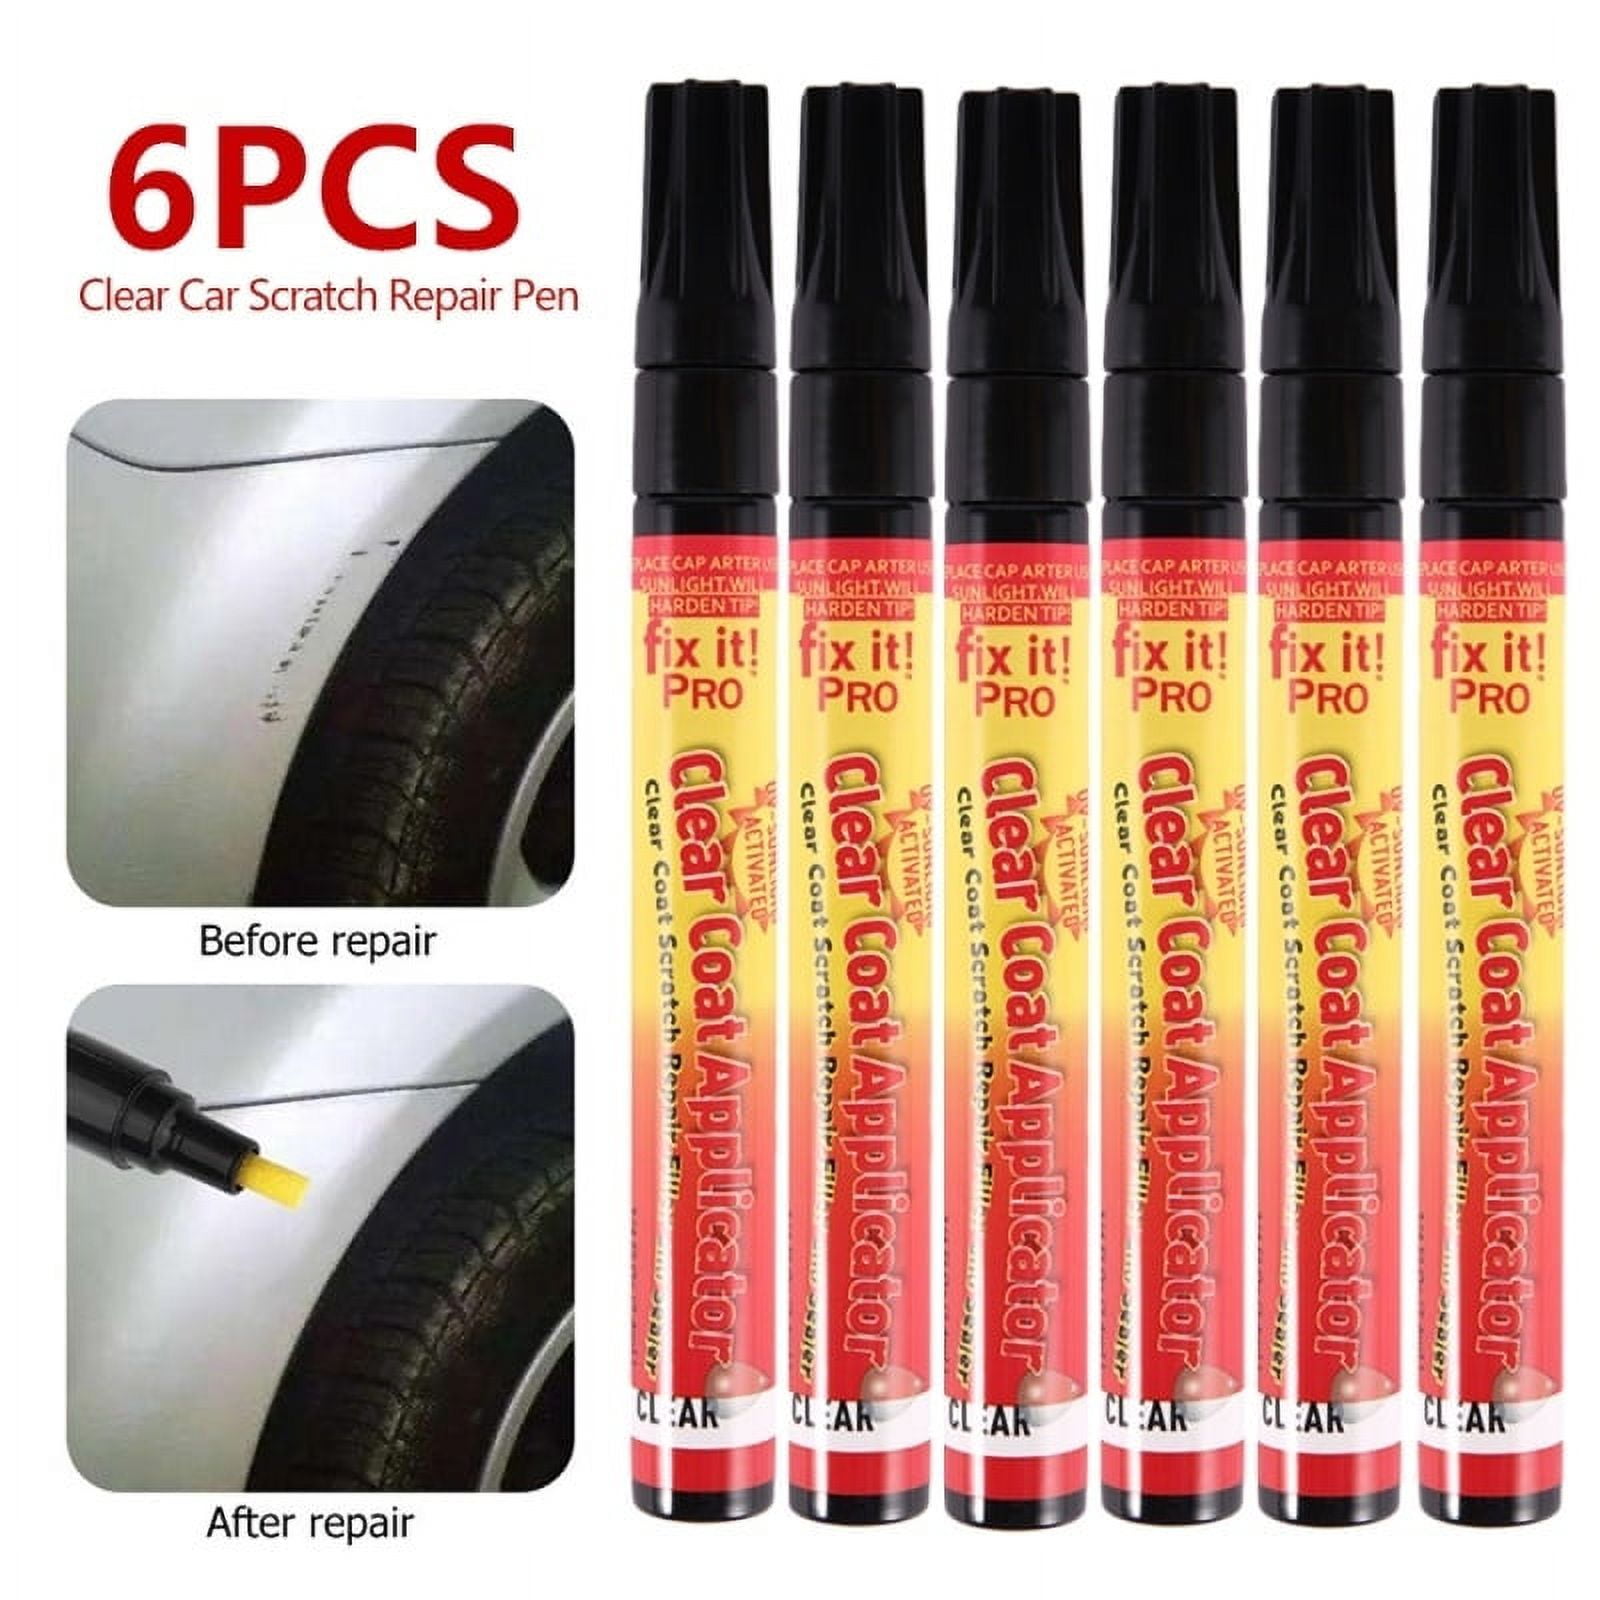 ZHANDIAN Professional Car Repair Paint Stroke Pen For Clear Paint Stroke,  Scratch Removal And Fixing. From Ordermix, $0.64